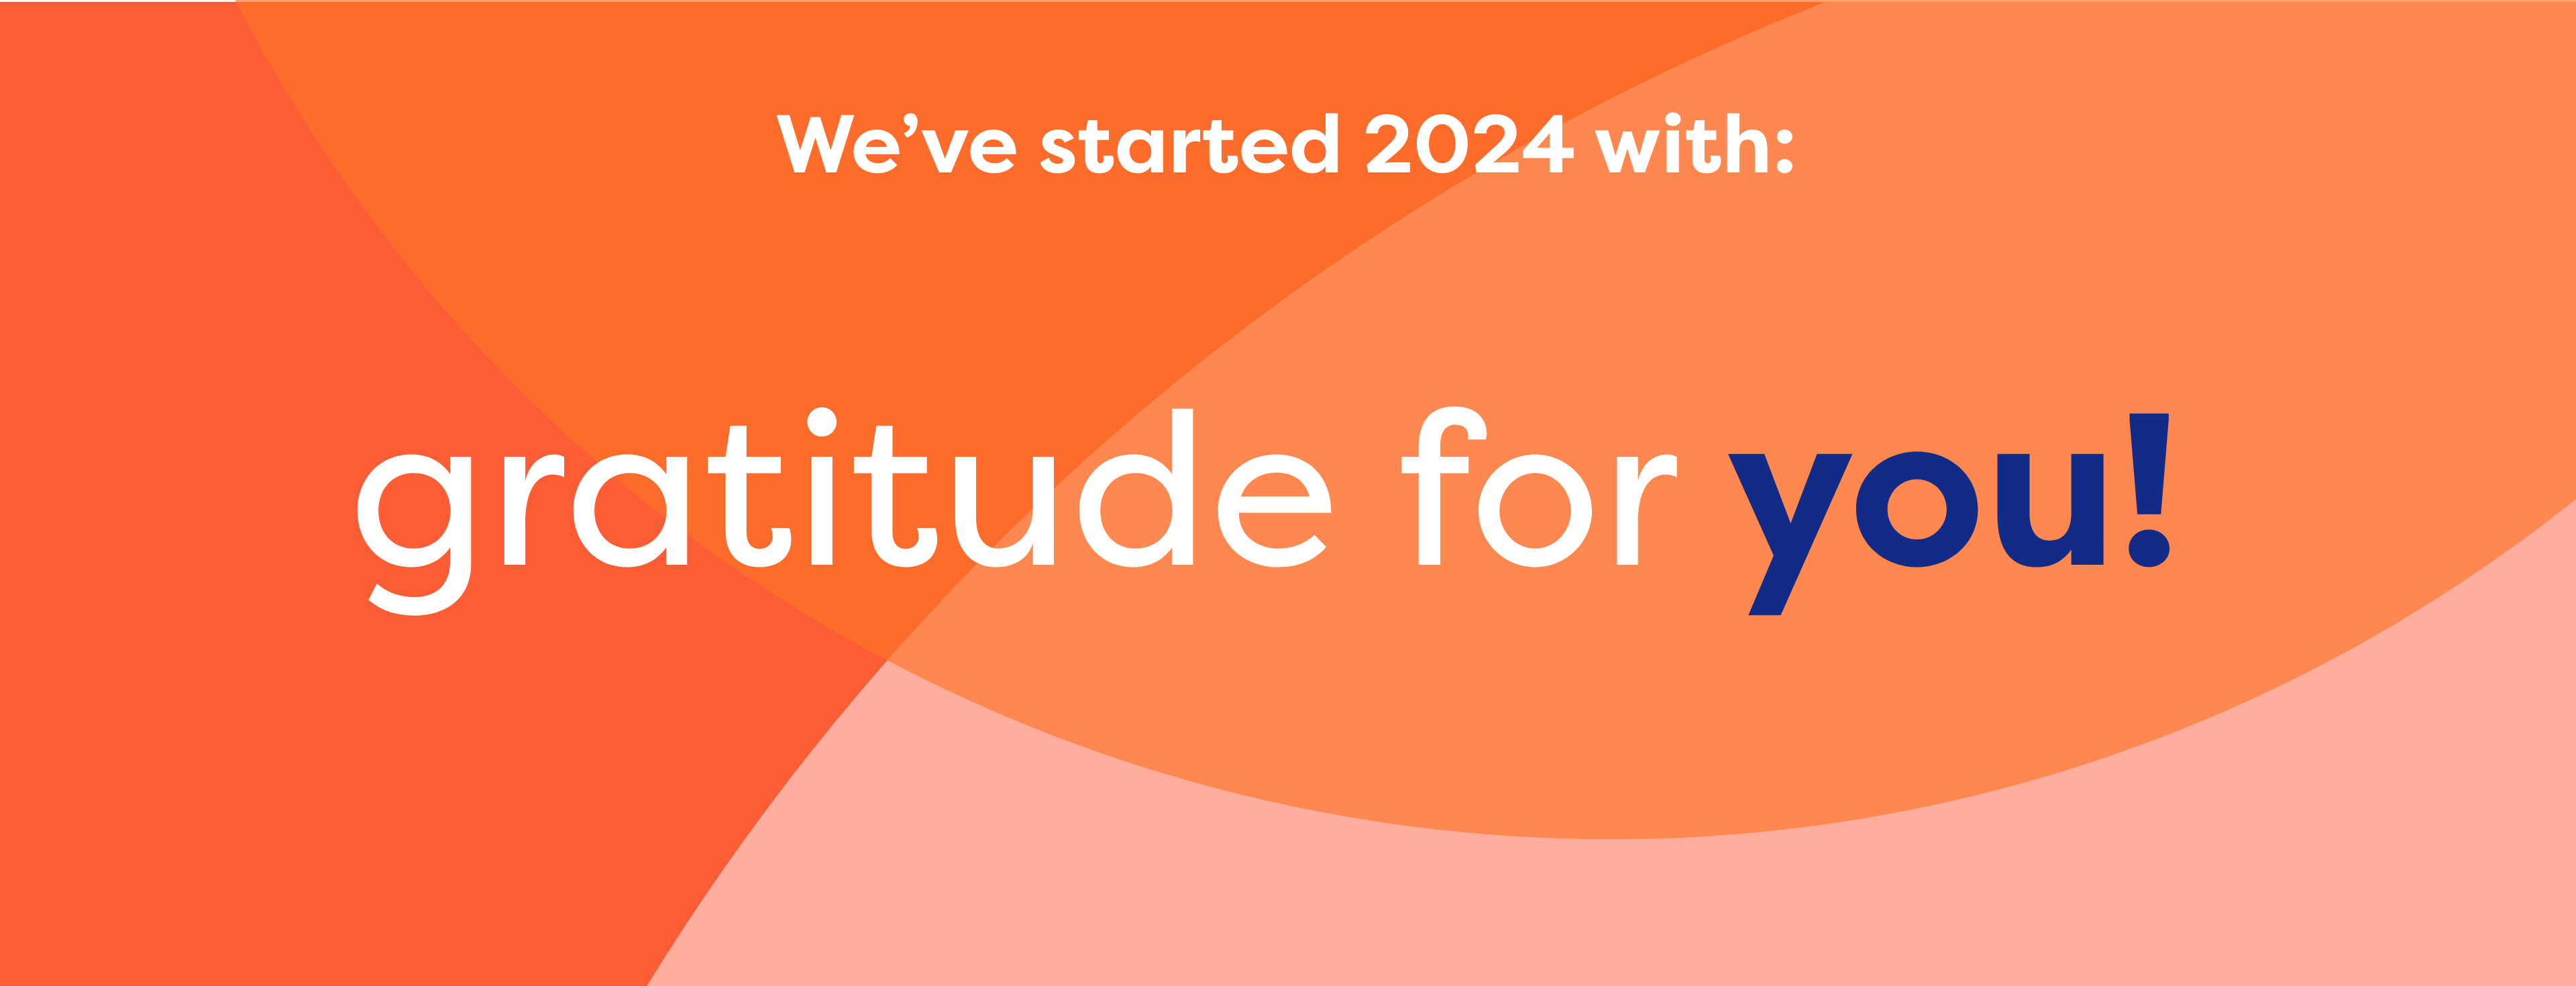 We've started 2024 with: gratitude for you!